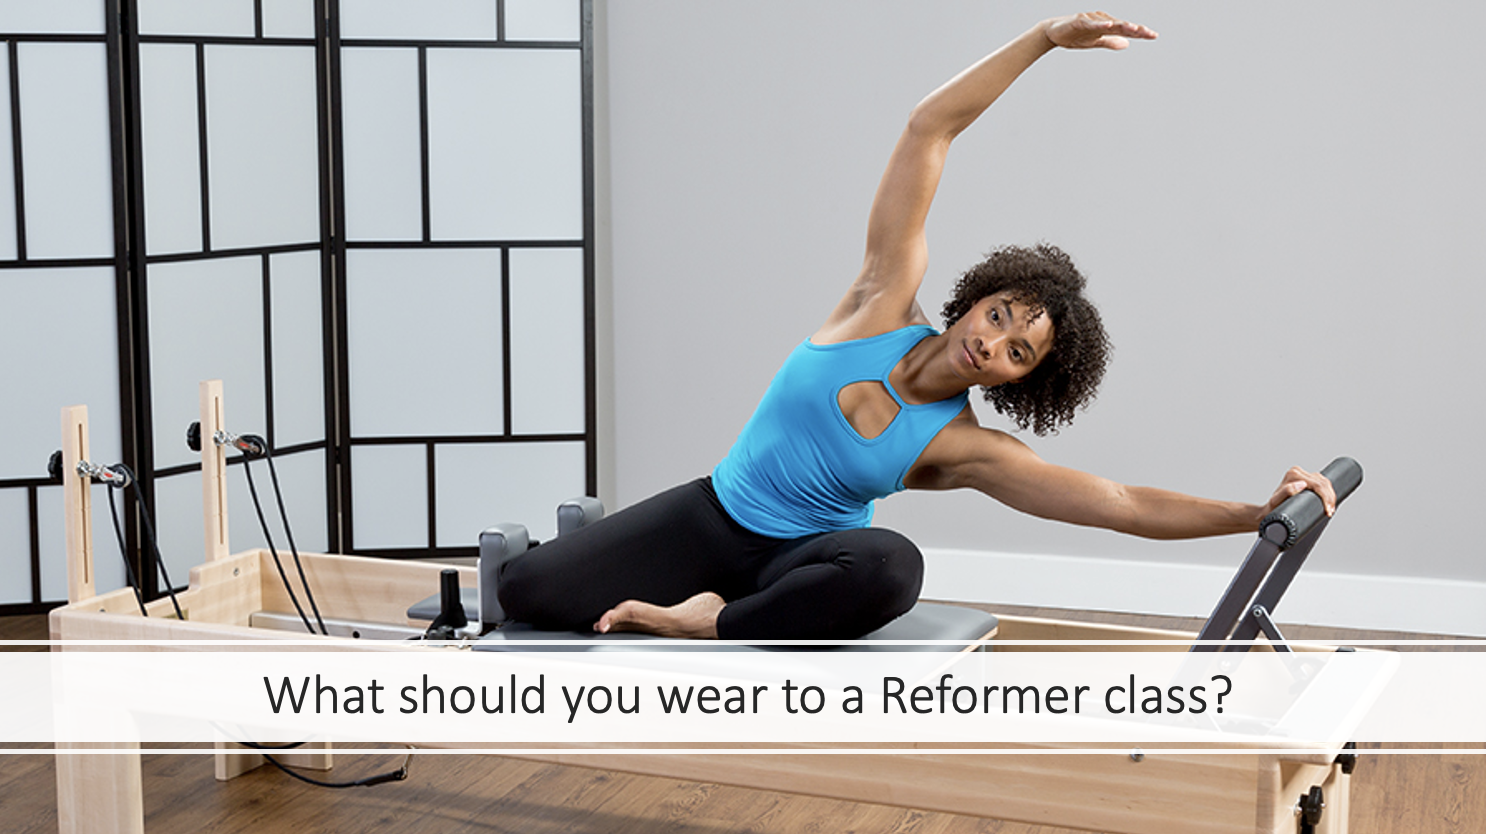 What should you wear to a reformer class?